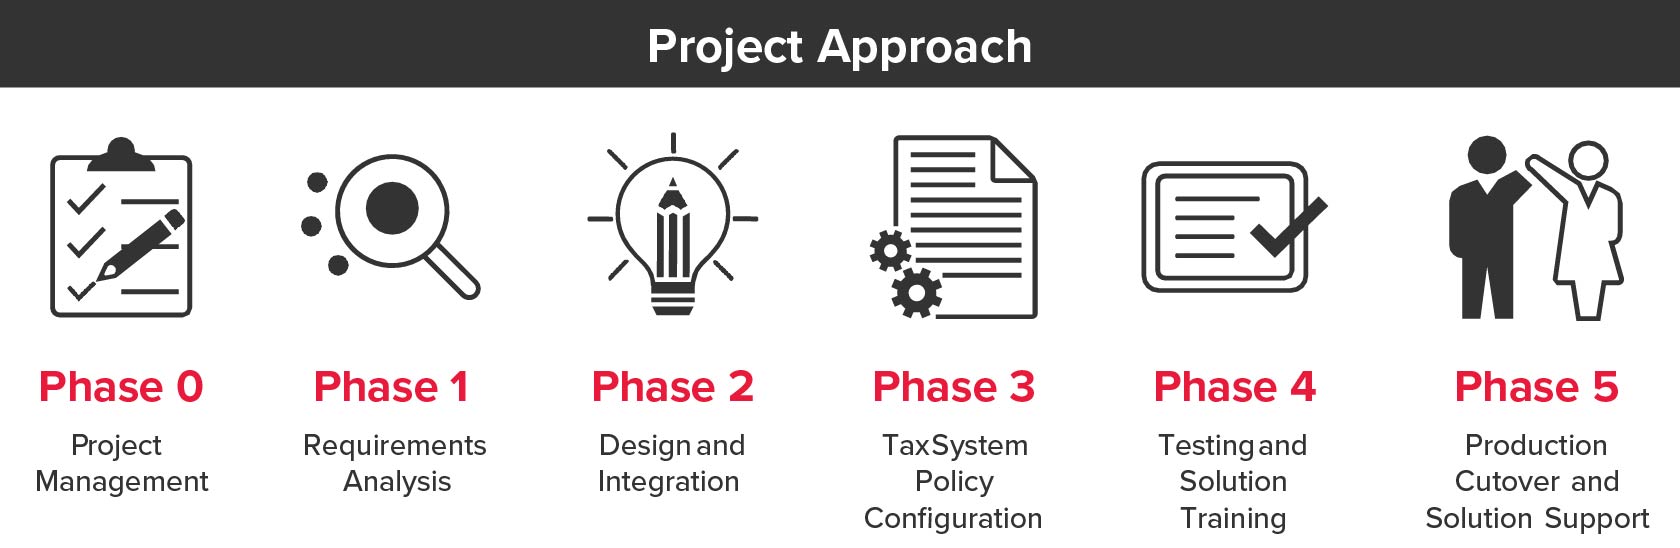 Project Approach graphic.